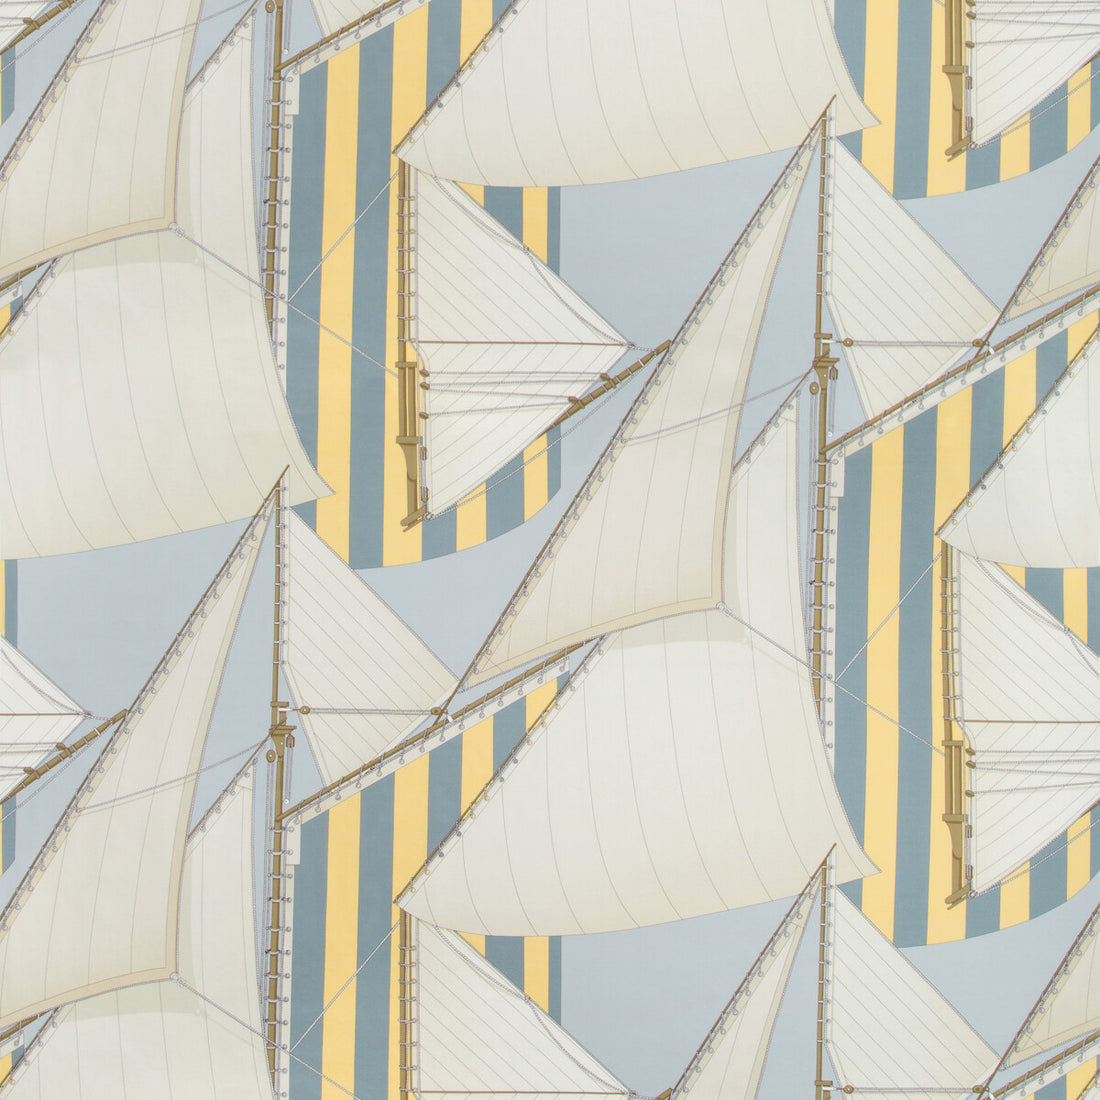 St Tropez Print fabric in blue/yellow color - pattern 2018136.405.0 - by Lee Jofa in the Suzanne Kasler The Riviera collection